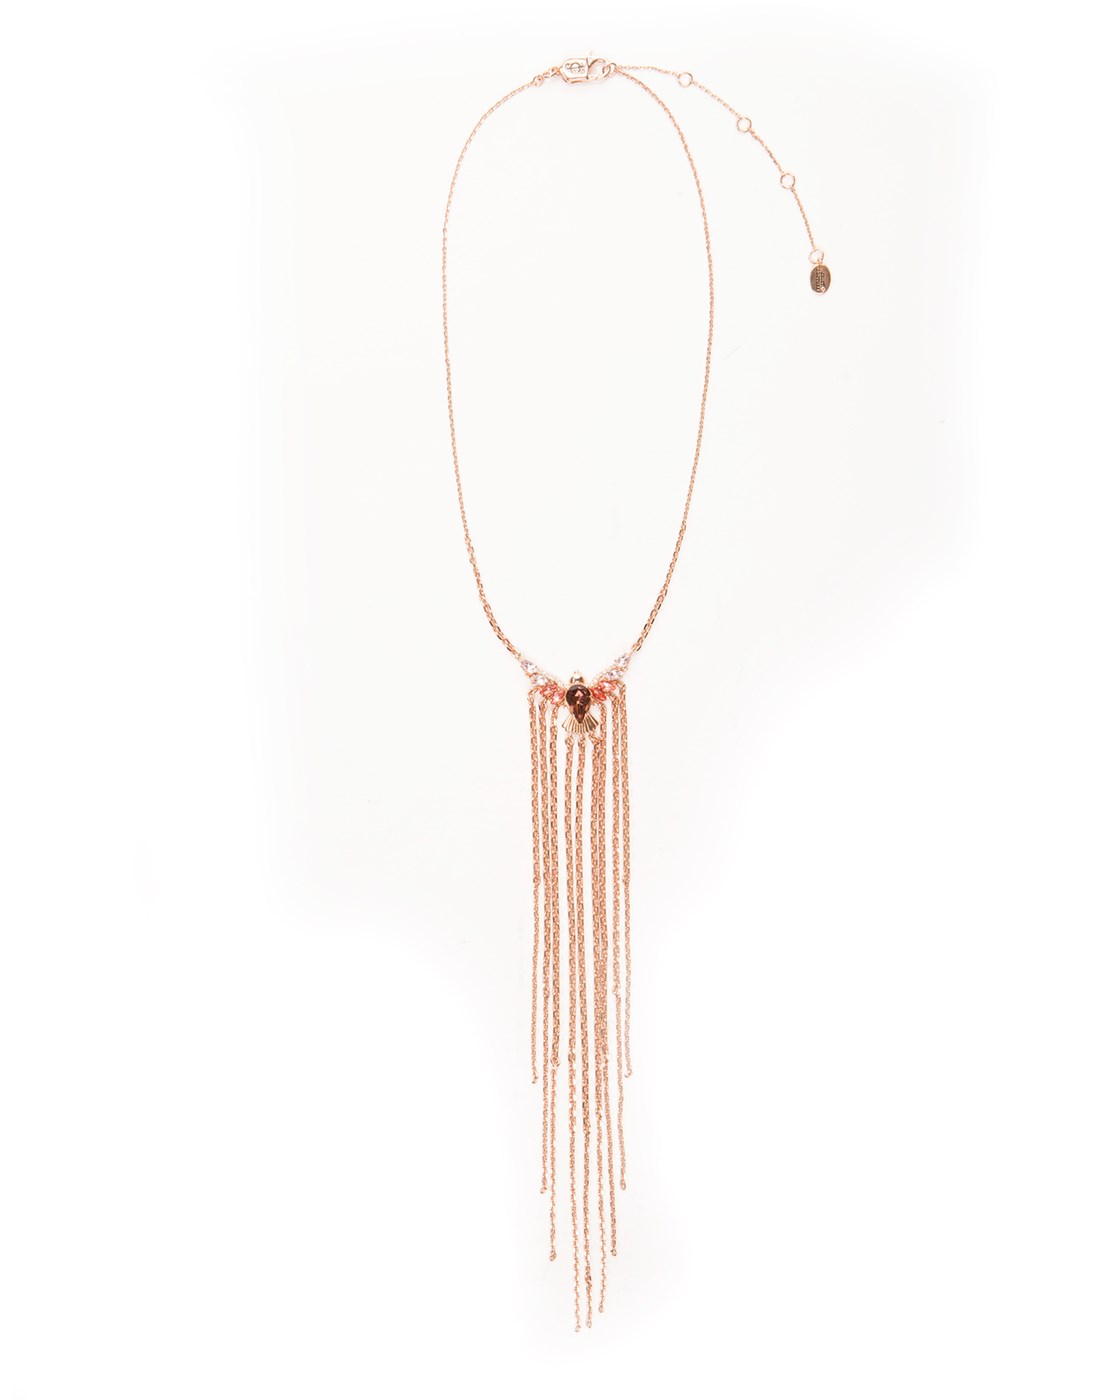 Juicy Couture Fringe Forward Statement Necklace